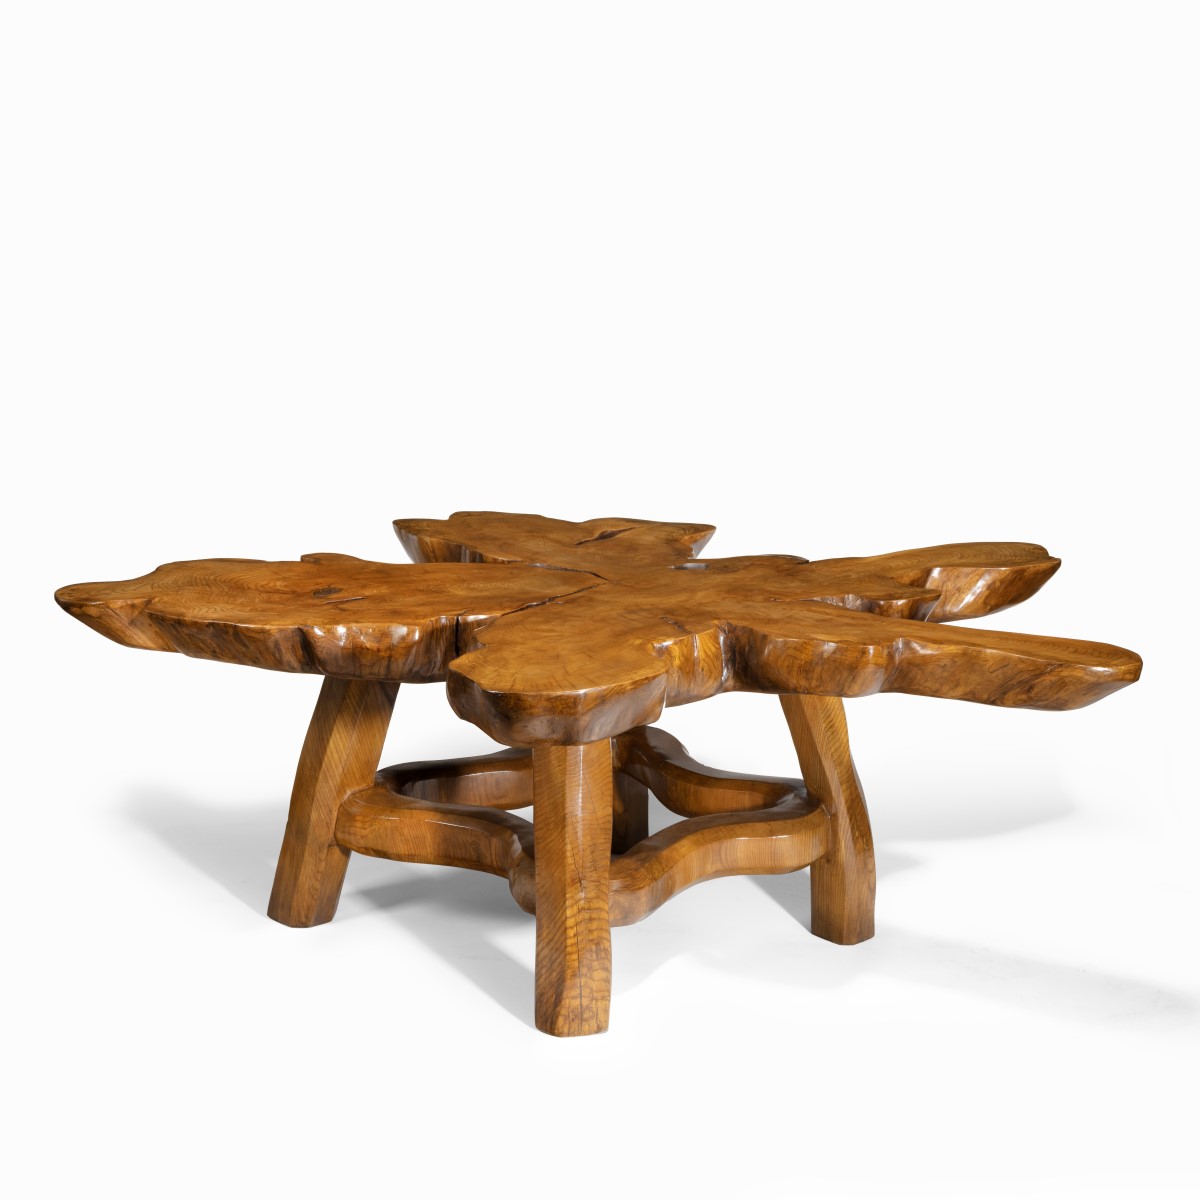 Centre Table by Maxie Lane Main Image